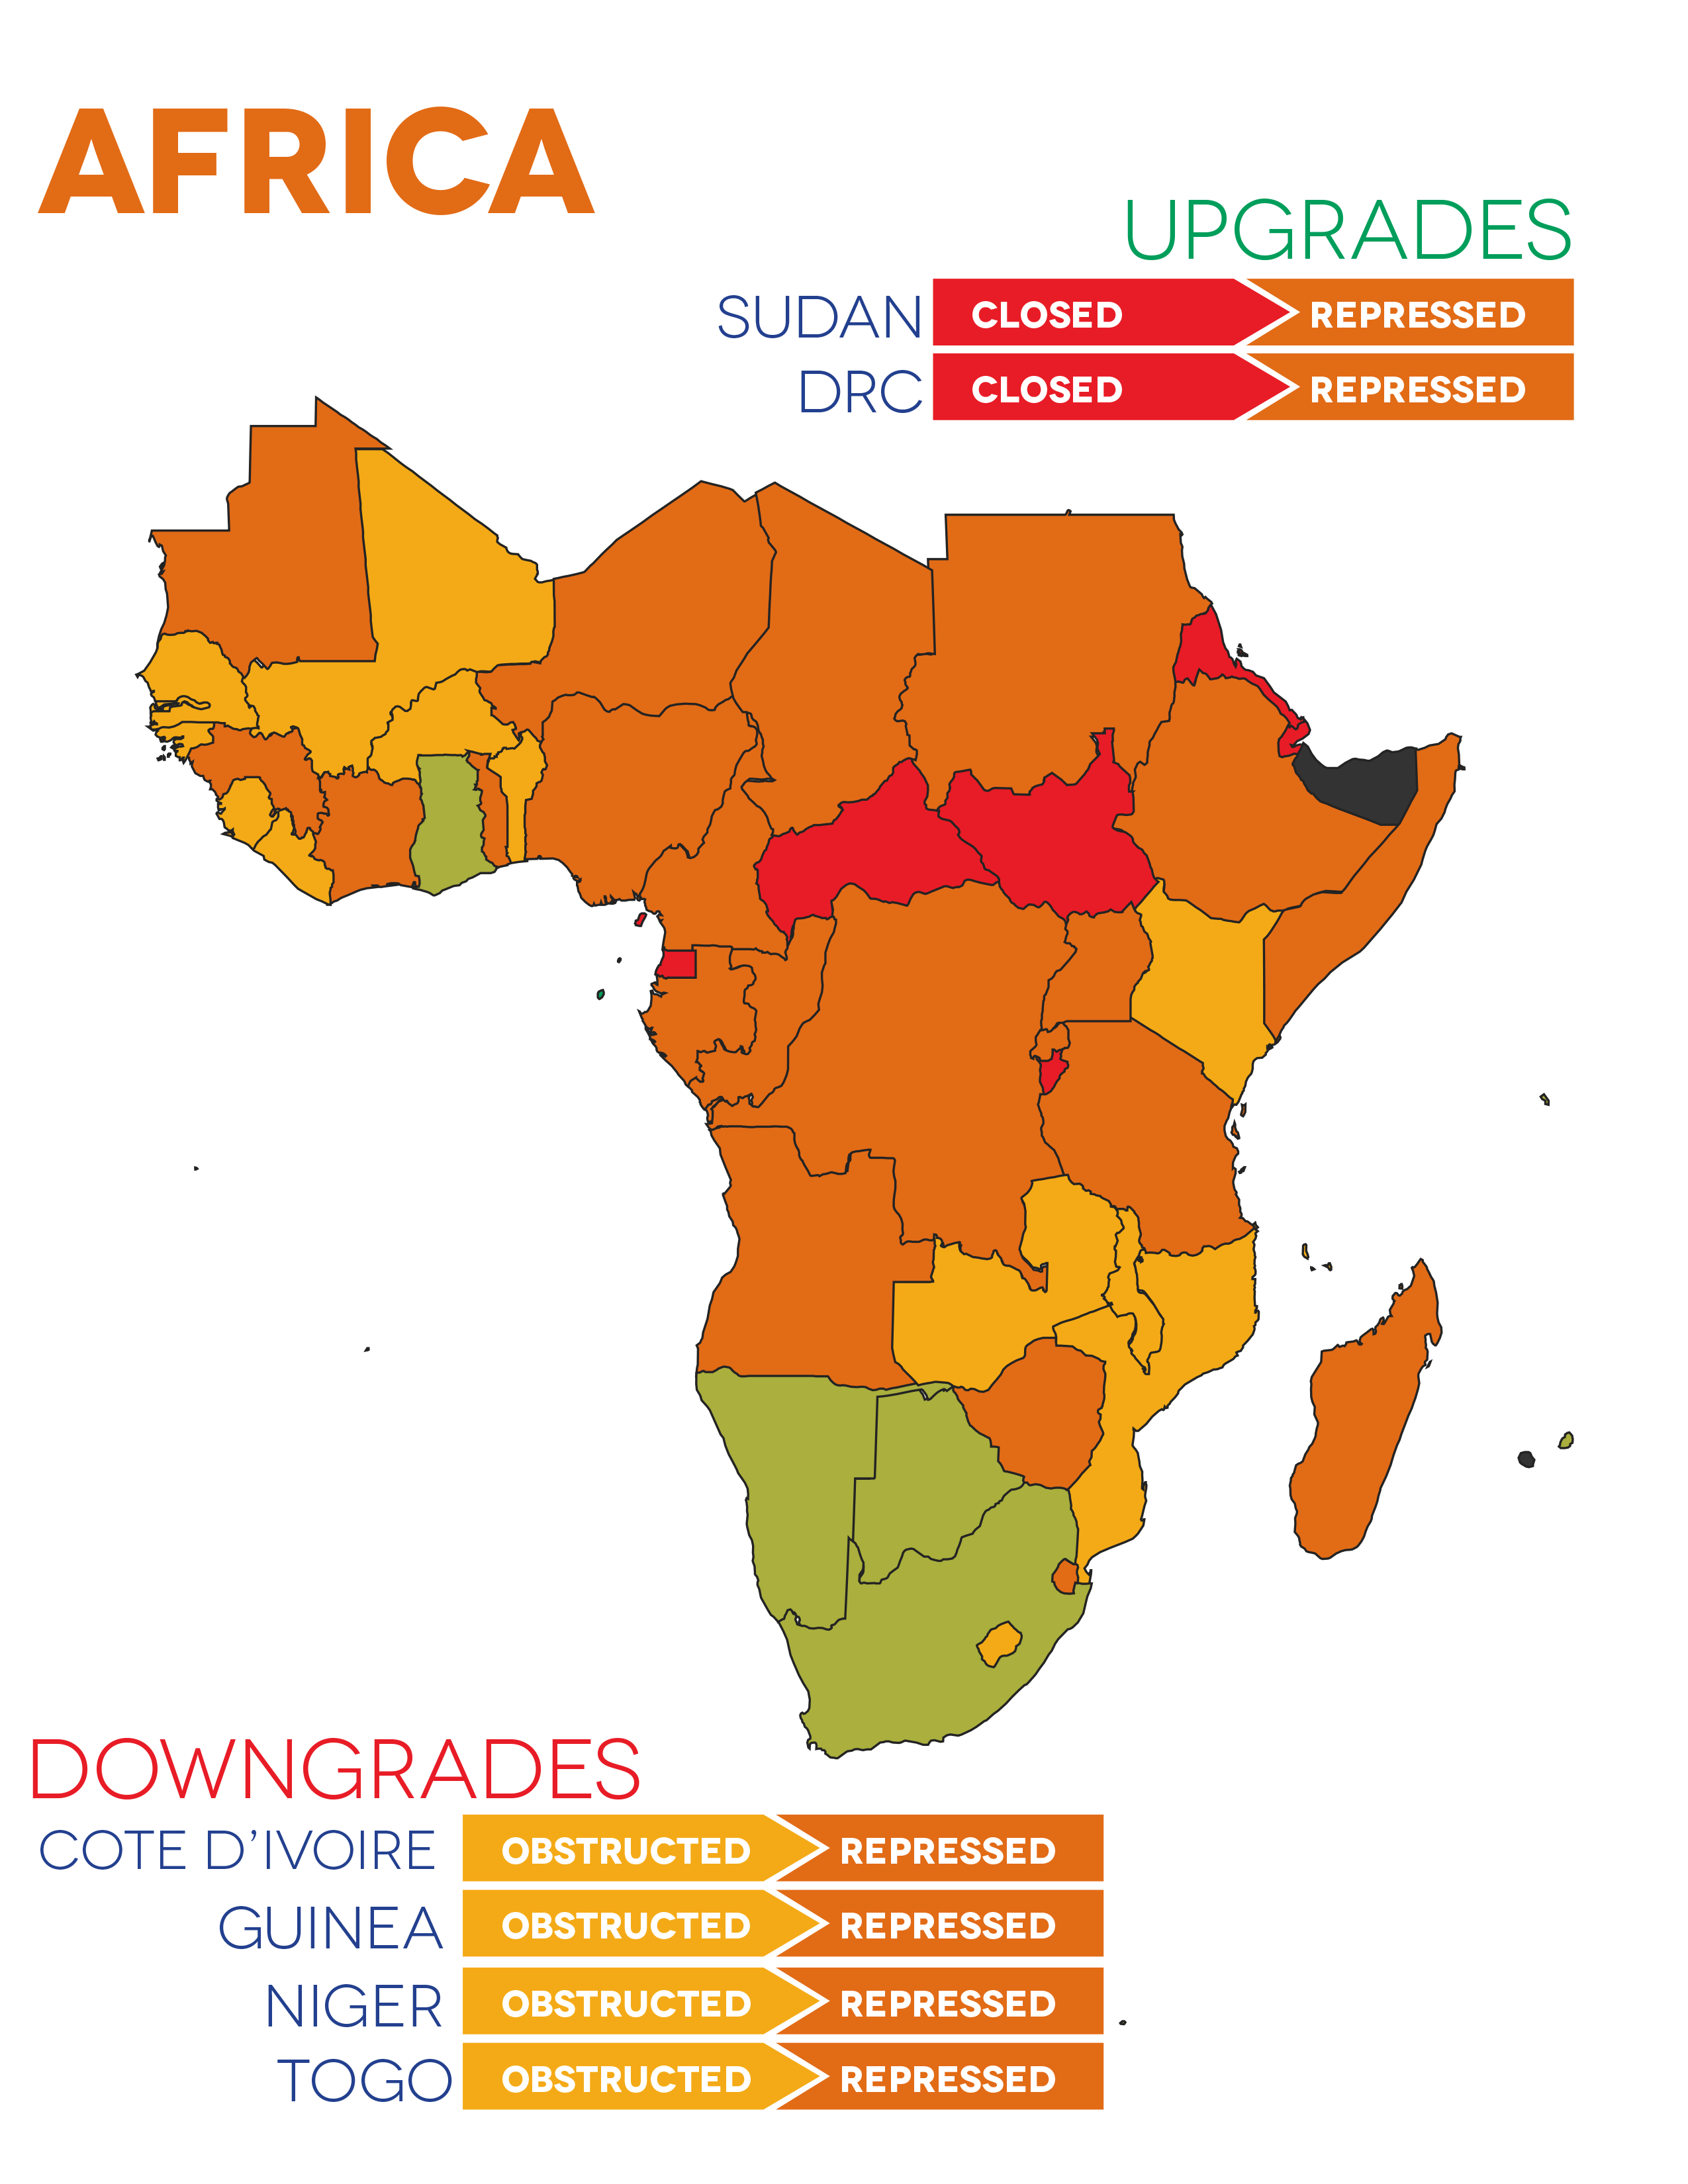 ratings overview in Africa